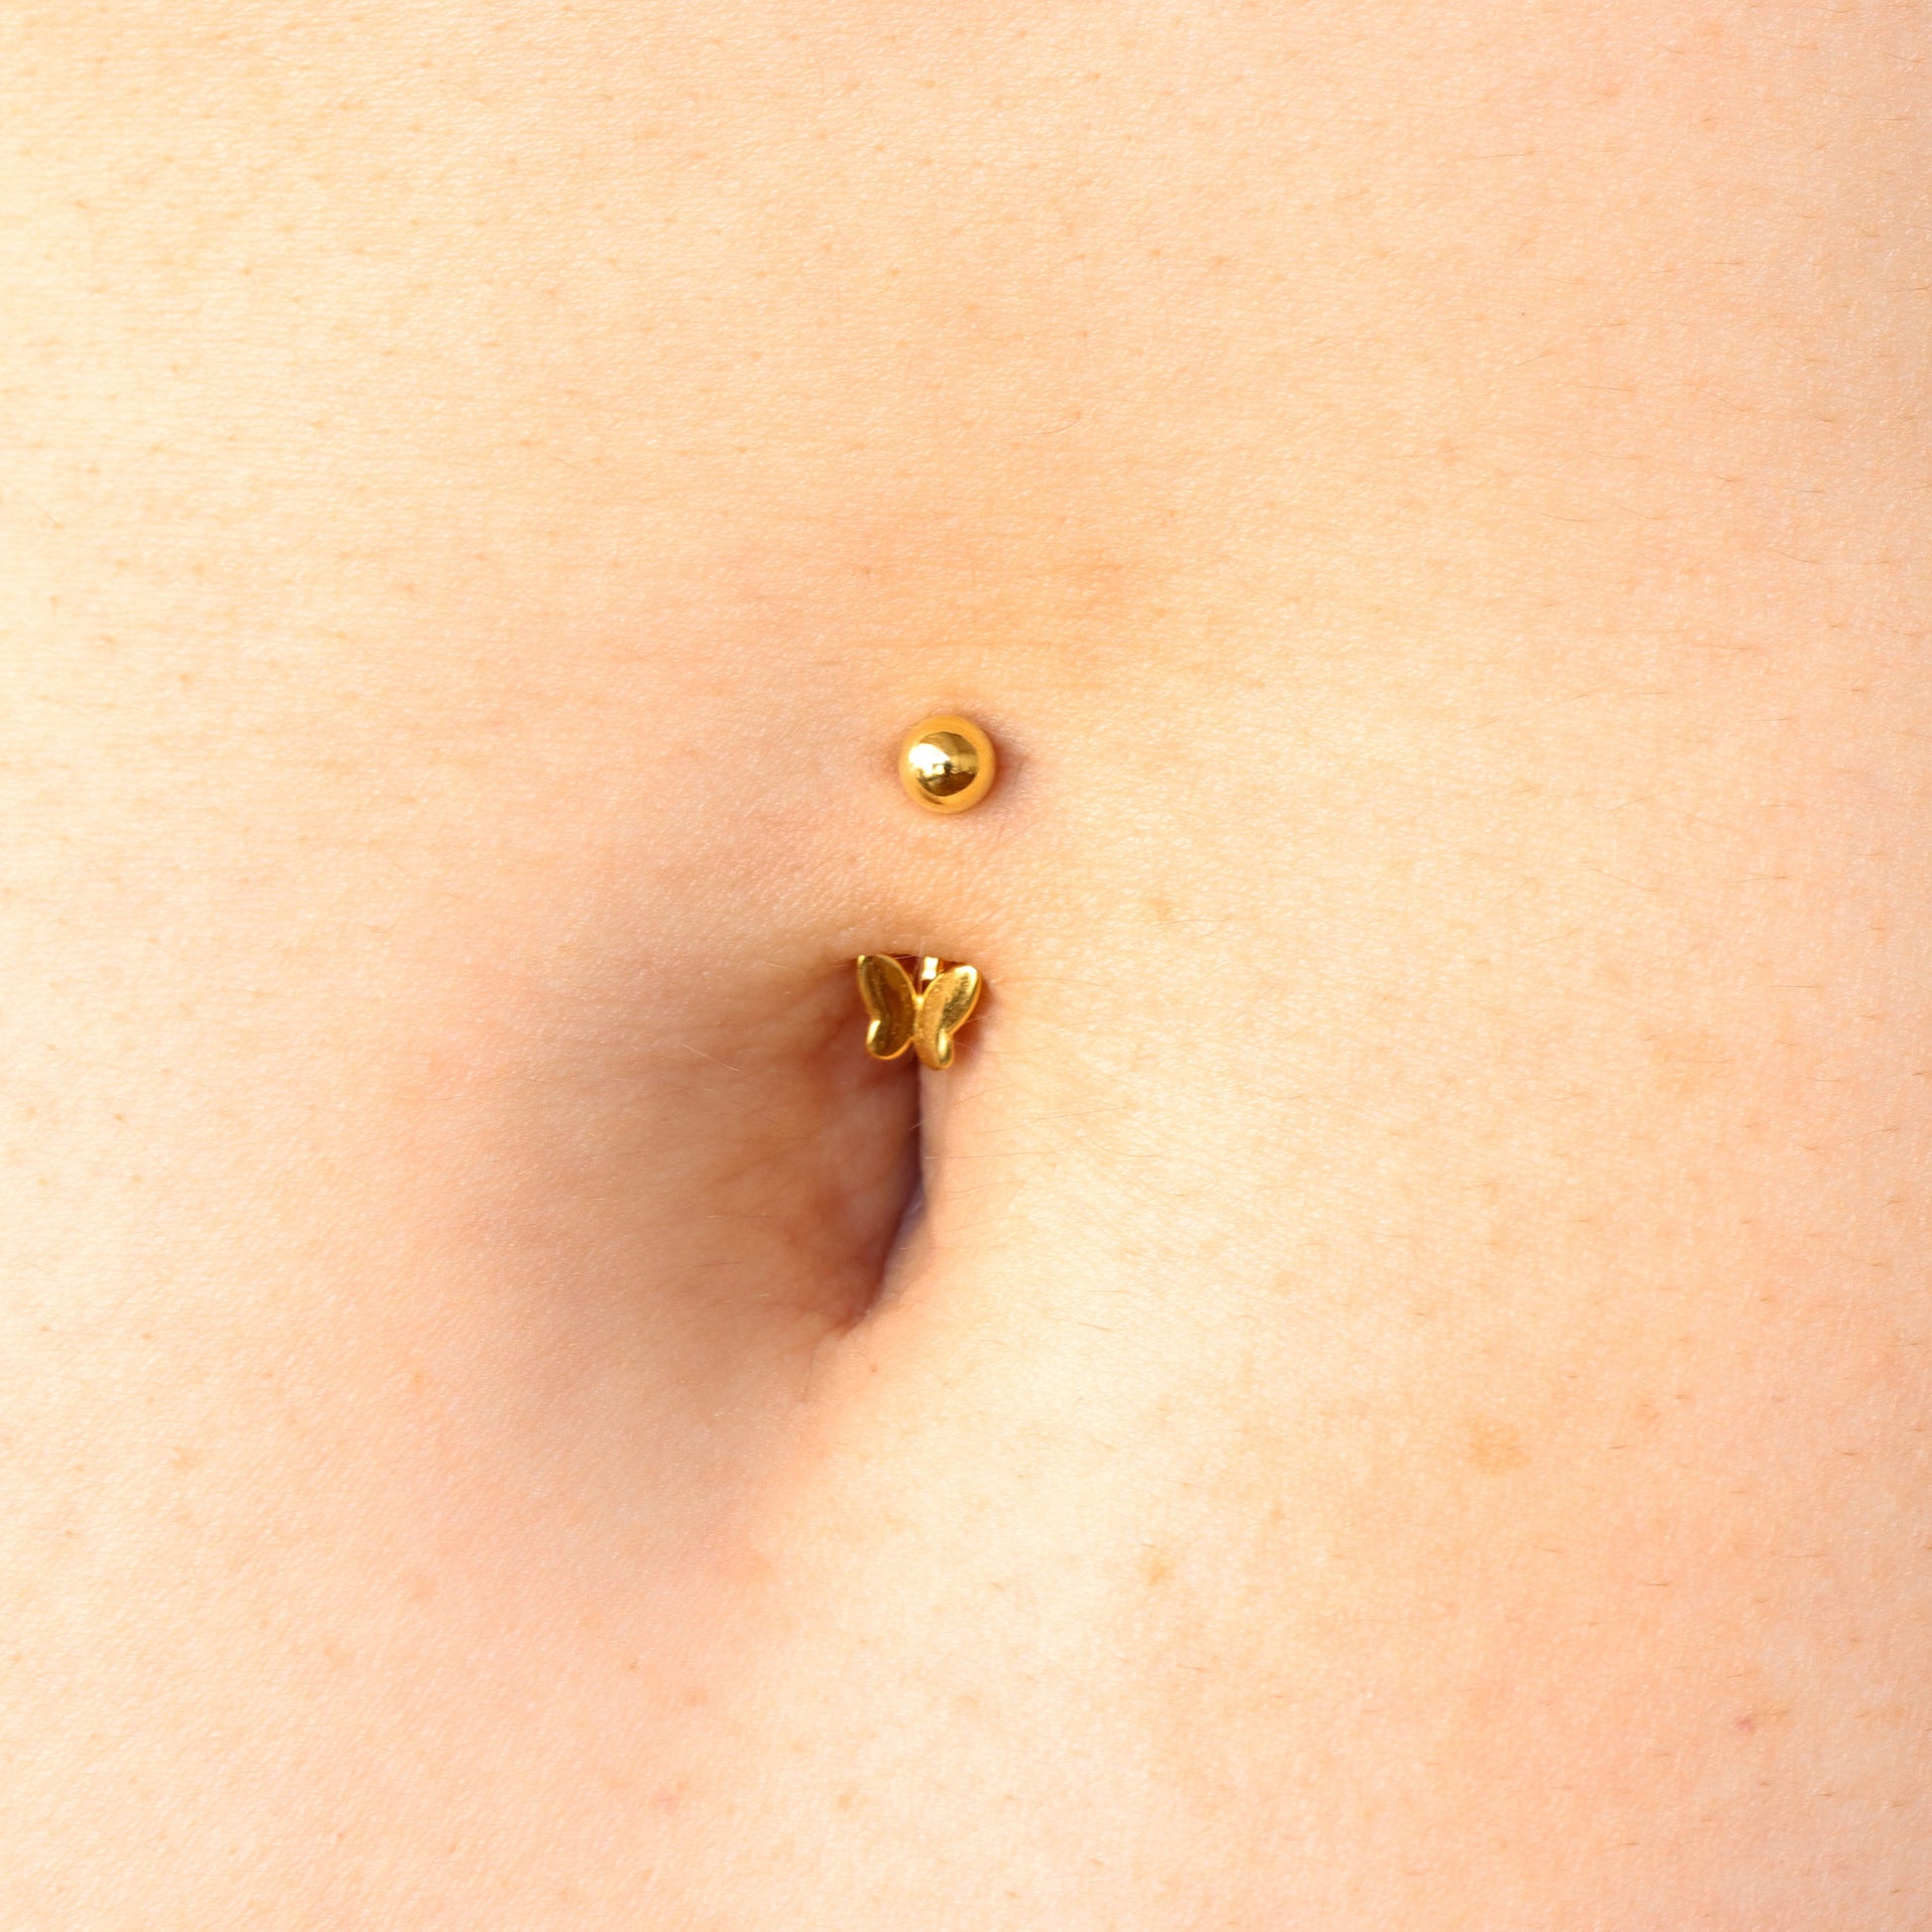 Vermeil | 24k Gold Coated 925 Silver 16G/14G Petite Butterfly Belly Ring | 6mm 1/4" 8mm 5/16" 10mm 3/8" - Sturdy South